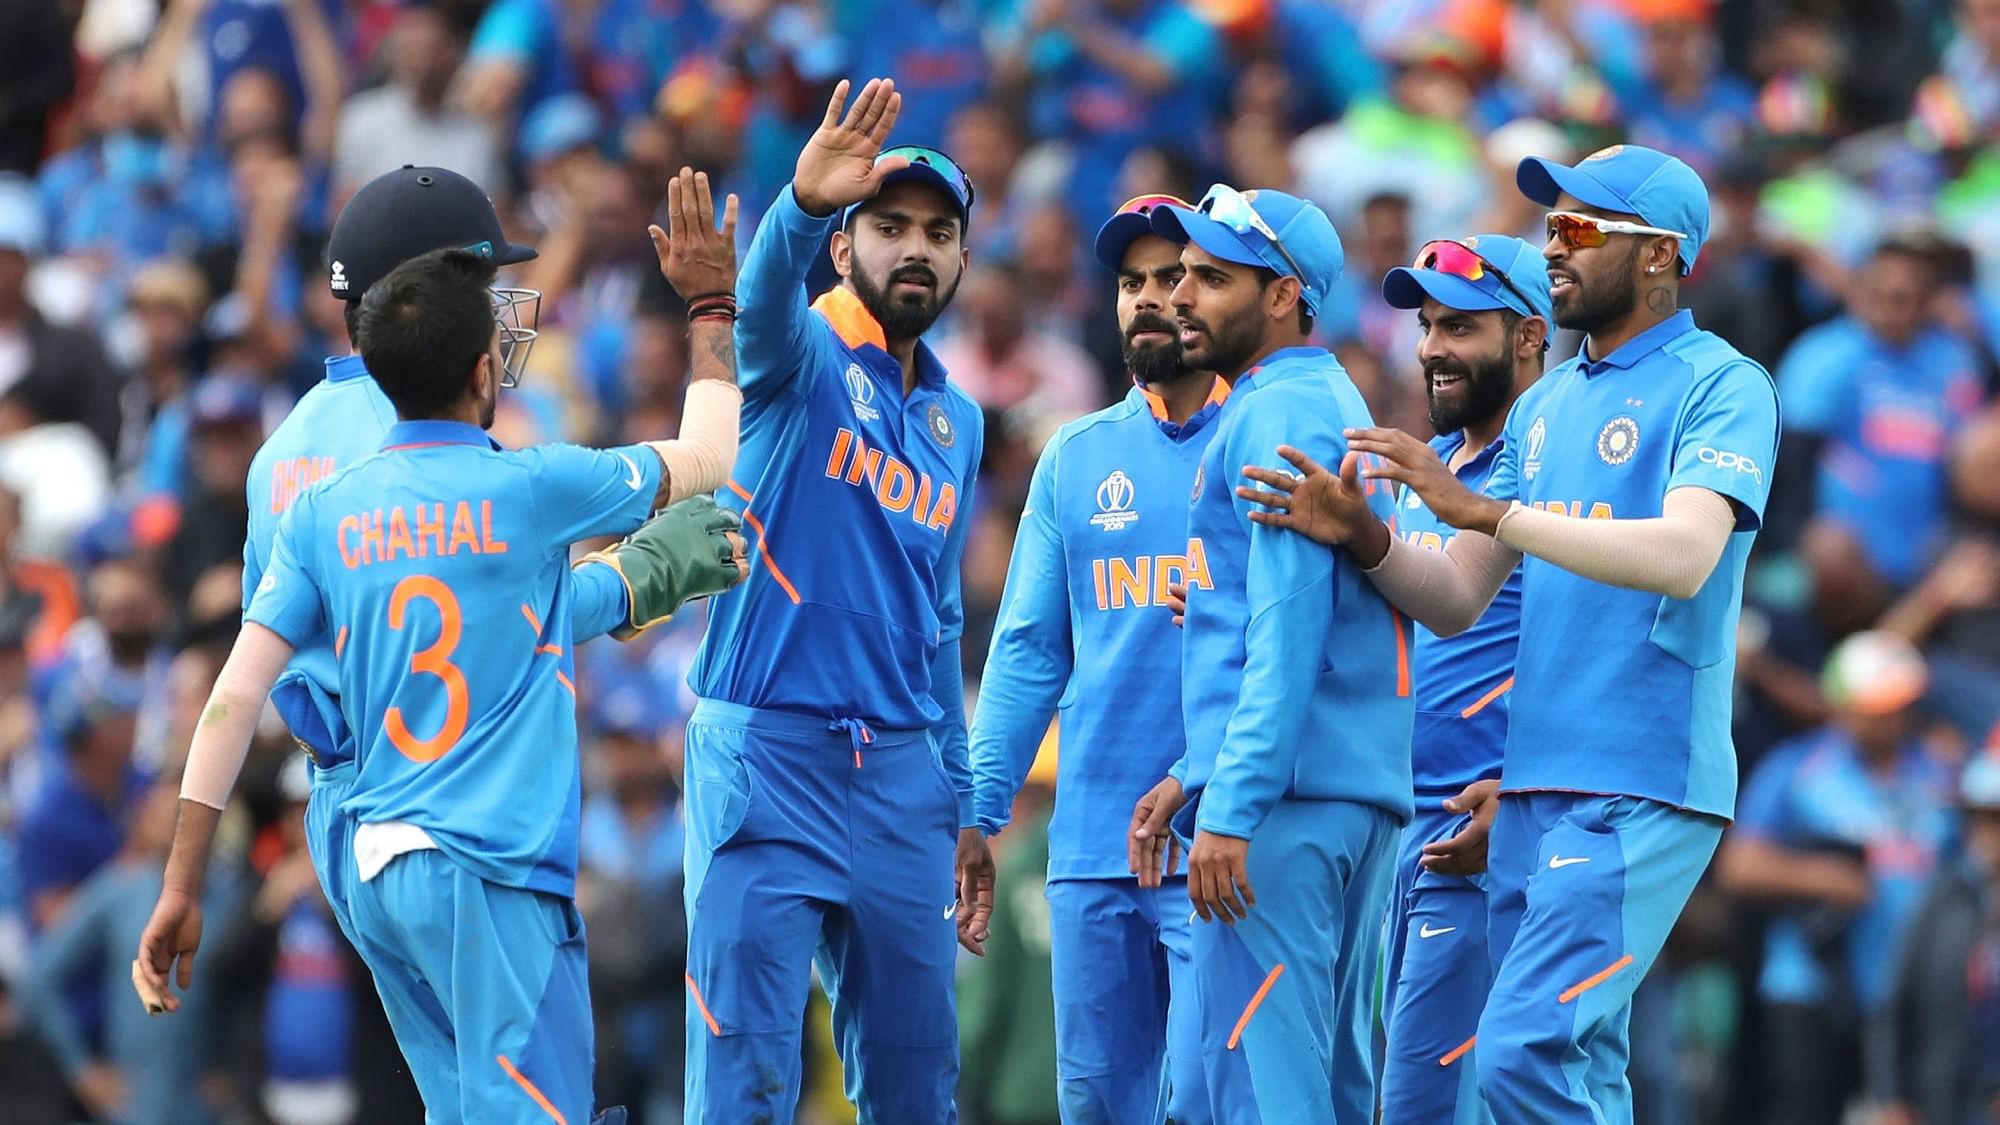 India now have two wins in as many matches.